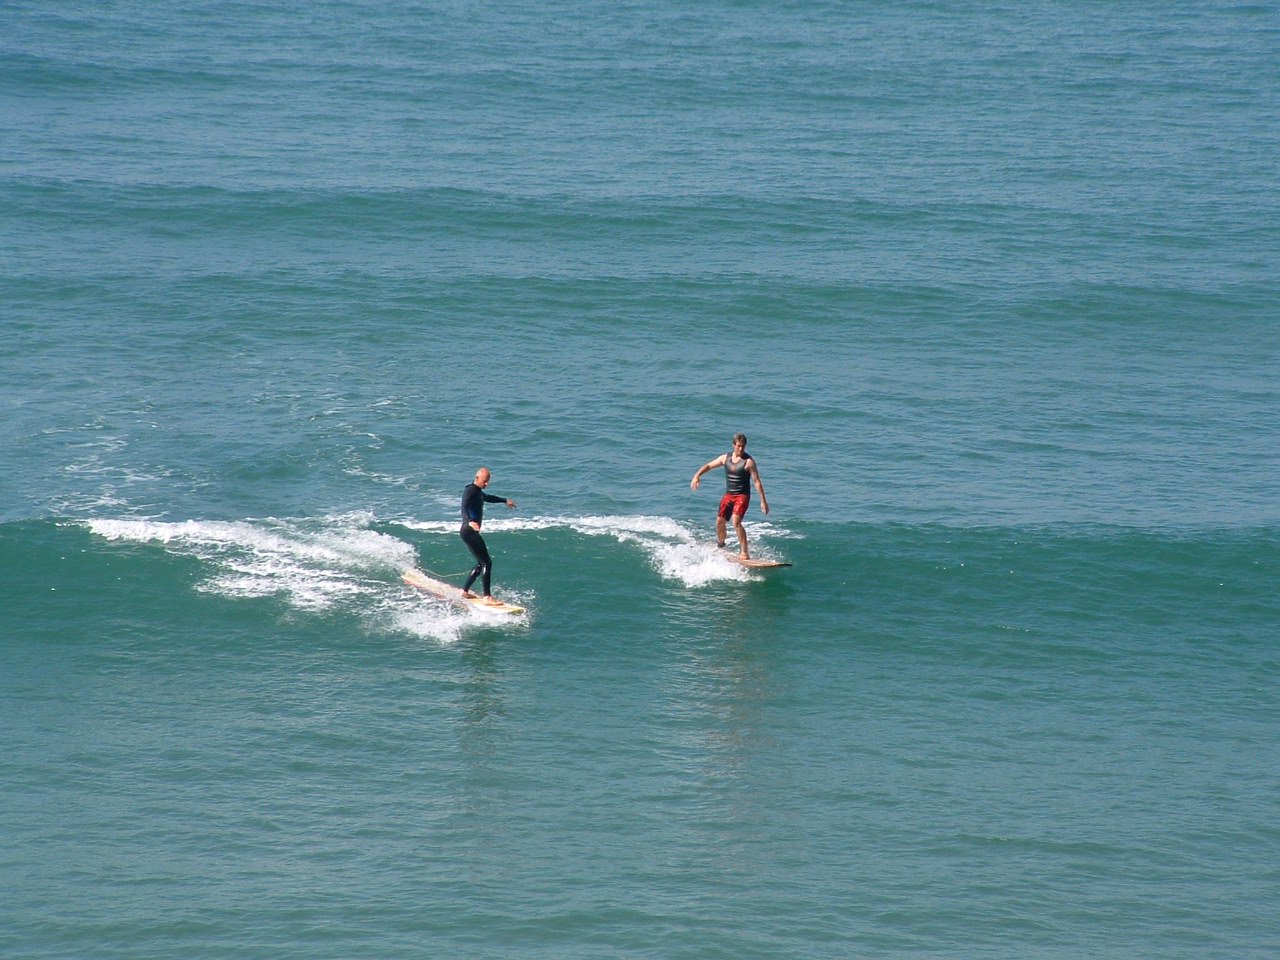 an old photo of two people surfing